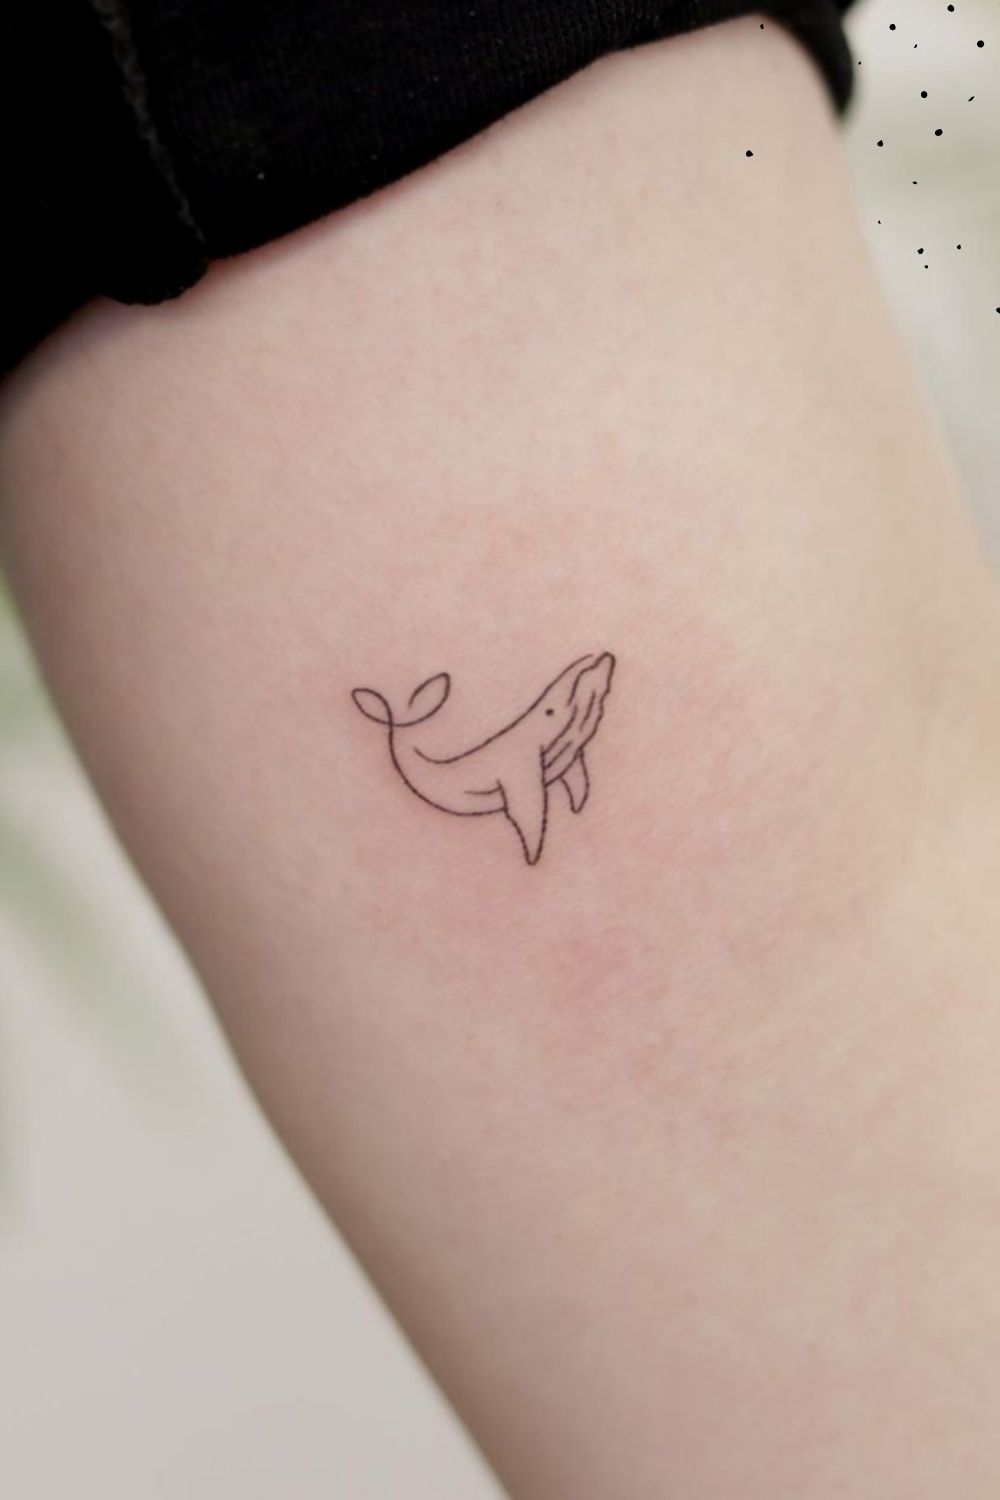 Dolphins tattoo designs